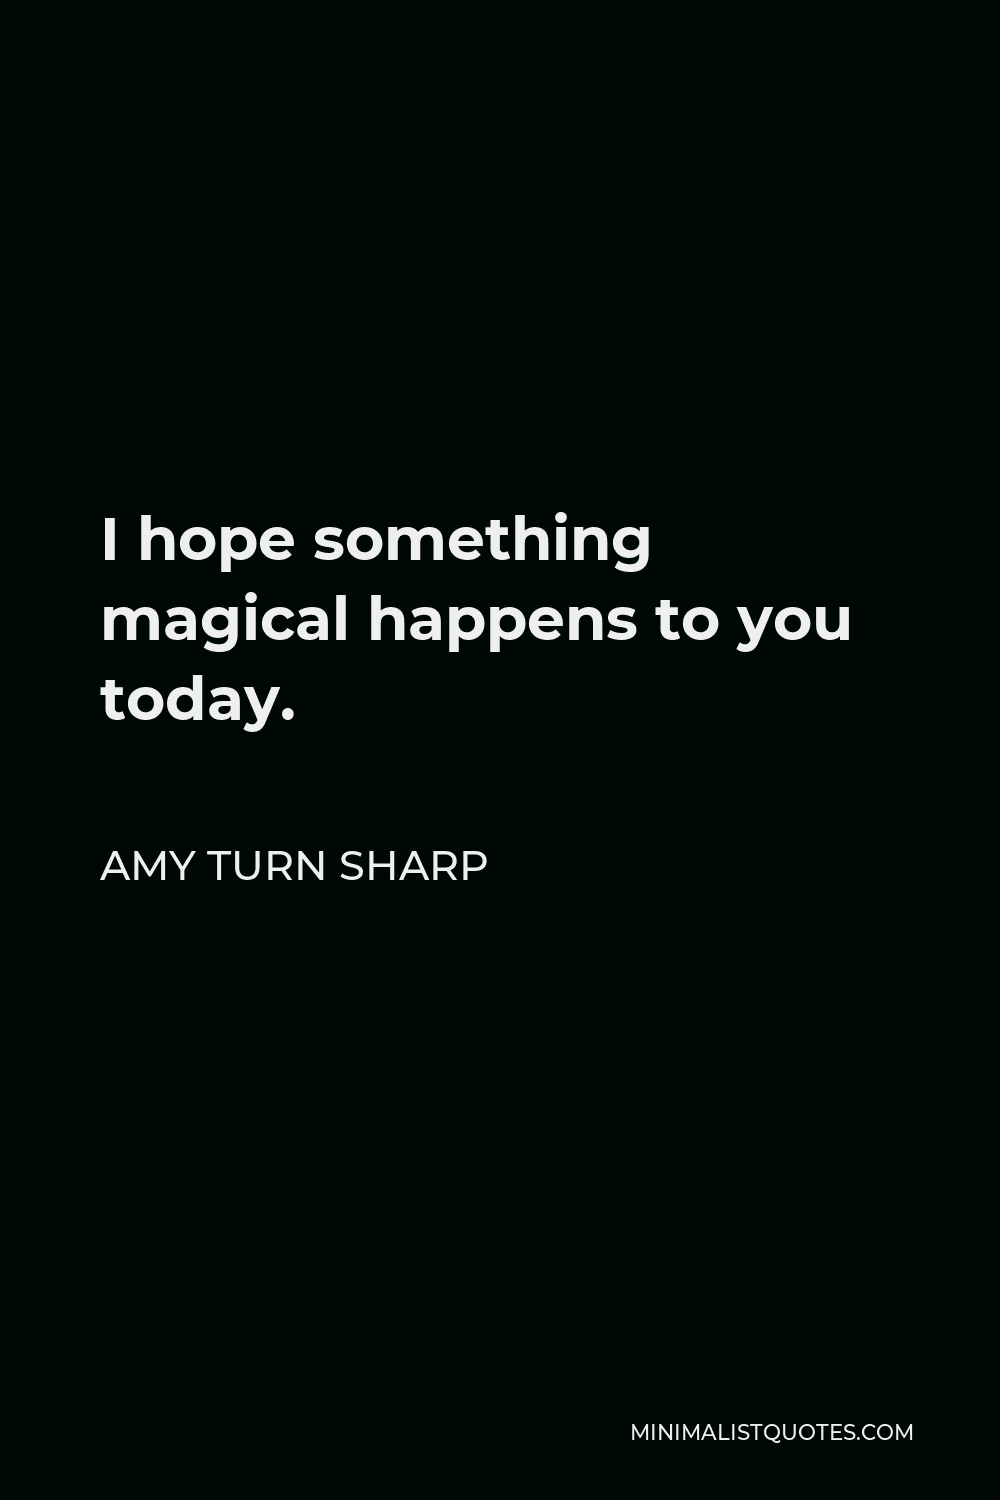 Amy Turn Sharp Quote - I hope something magical happens to you today.